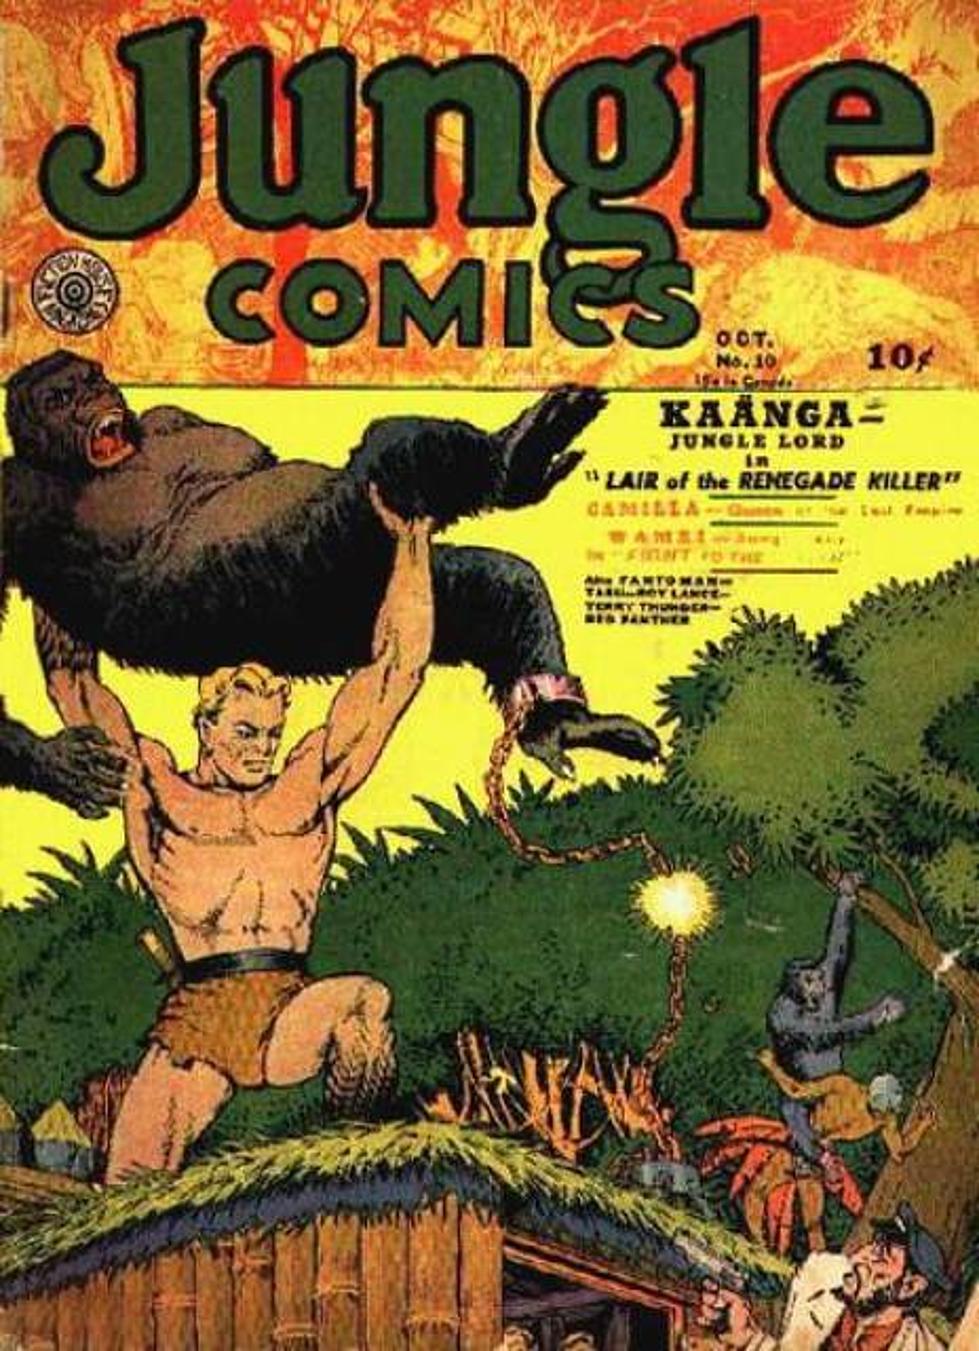 Gorillas in Our Midst: A History of Gorillas in Comics